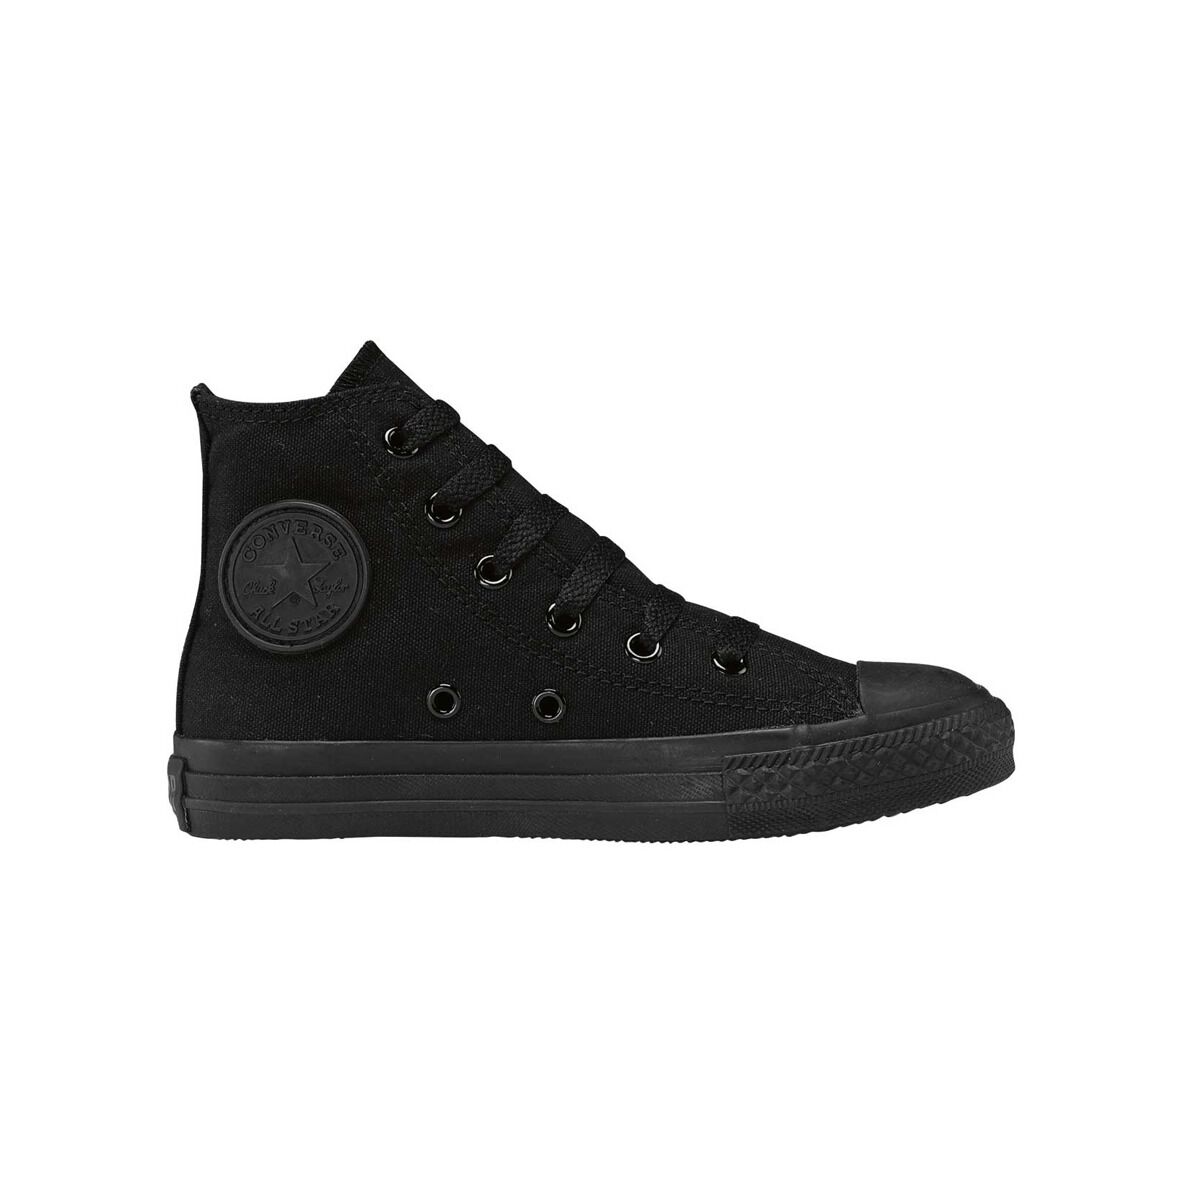 Converse Taylor All Star Classic High Top PS Kids Shoes Black US 12 Rebel Sport